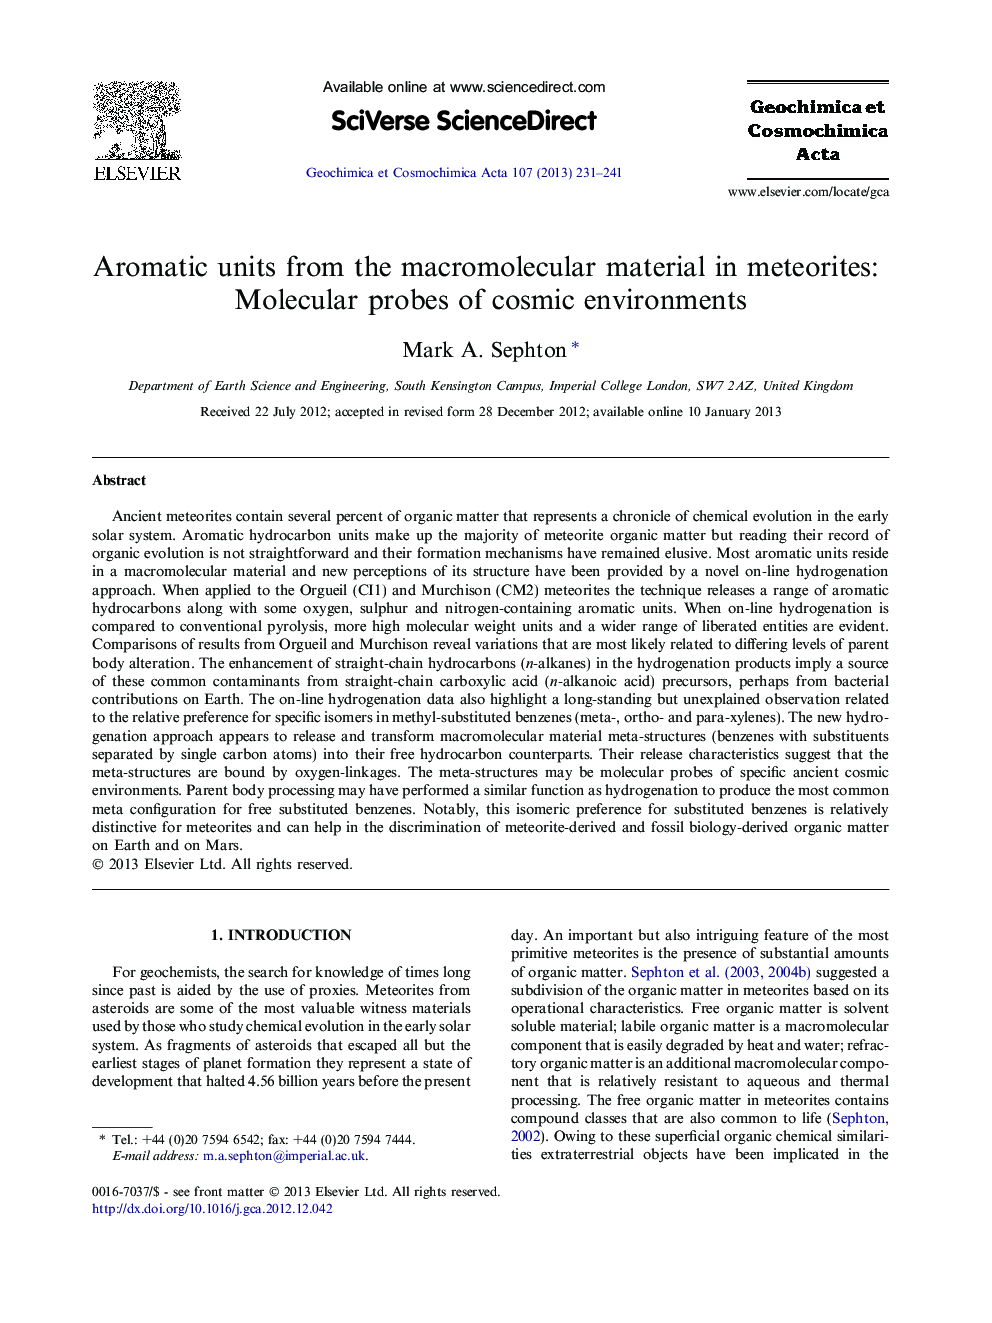 Aromatic units from the macromolecular material in meteorites: Molecular probes of cosmic environments